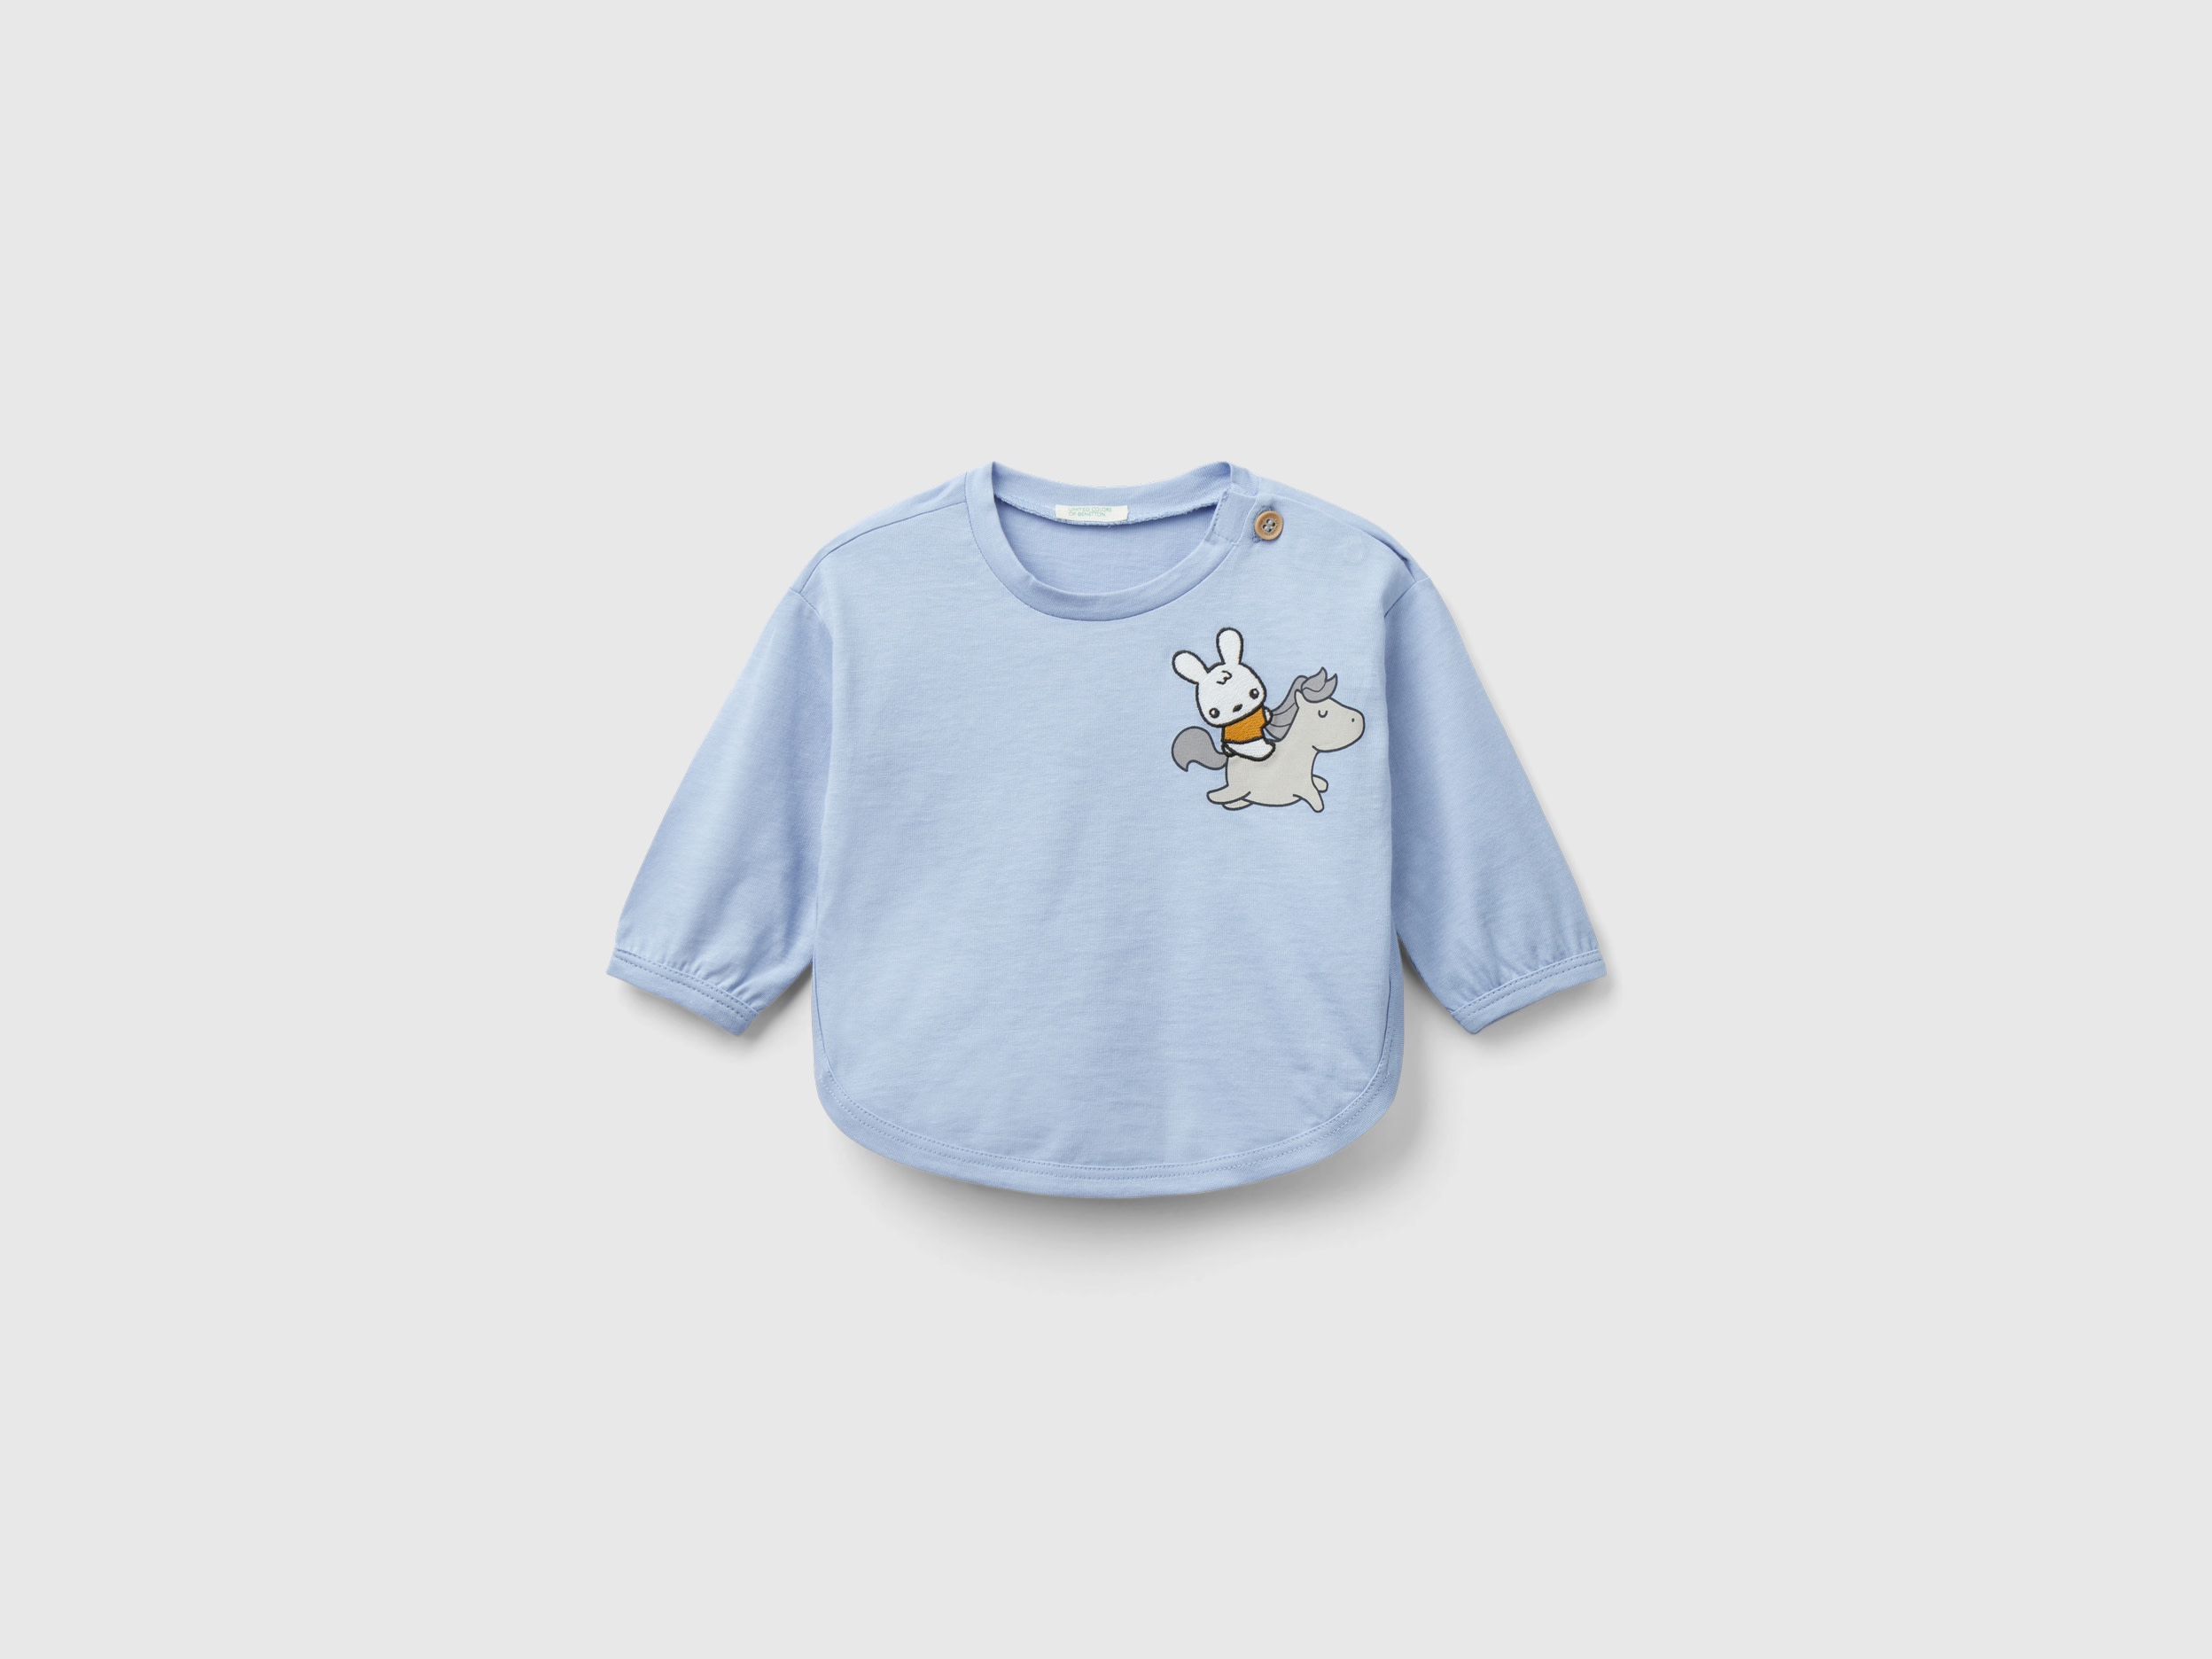 Image of Benetton, T-shirt In Organic Cotton With Print, size 74, Sky Blue, Kids